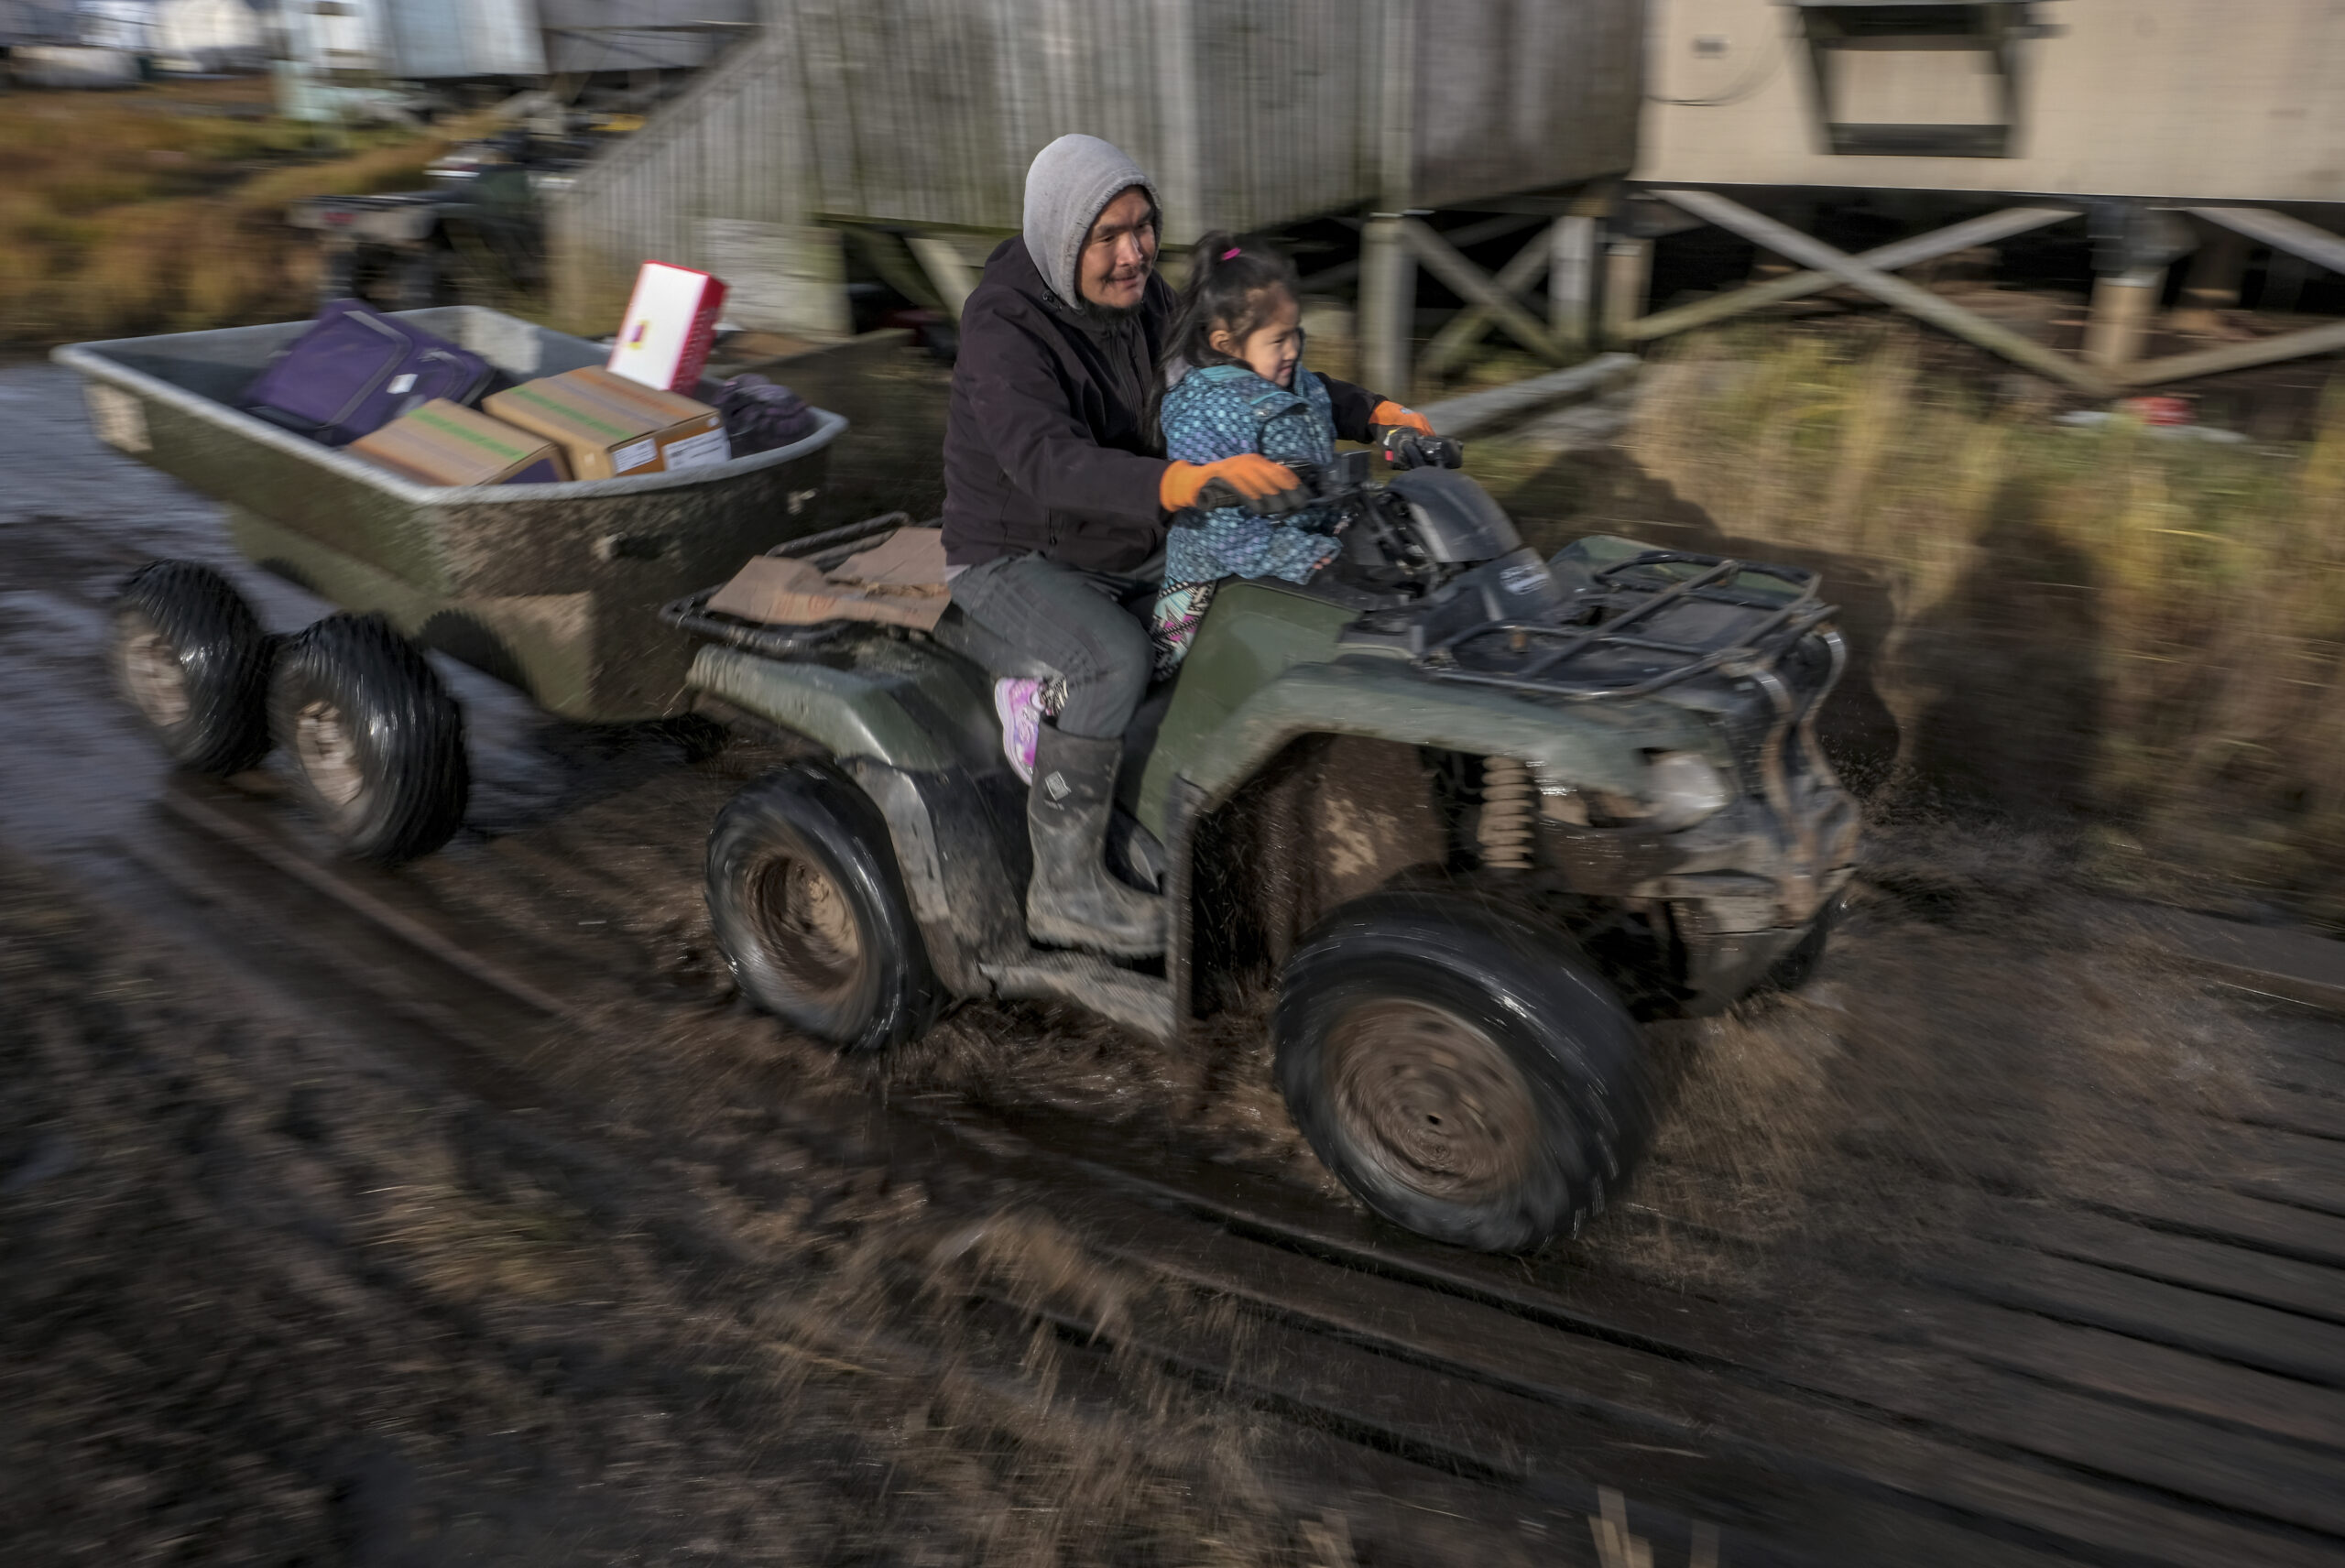 Pauly Andy transports people and belonging using an all-terrain vehicles in Newtok, Alaska, where melting permafrost, sinking tundra and flooding disturbed the boardwalks on October 9, 2019. Credit: Bonnie Jo Mount/The Washington Post via Getty Images